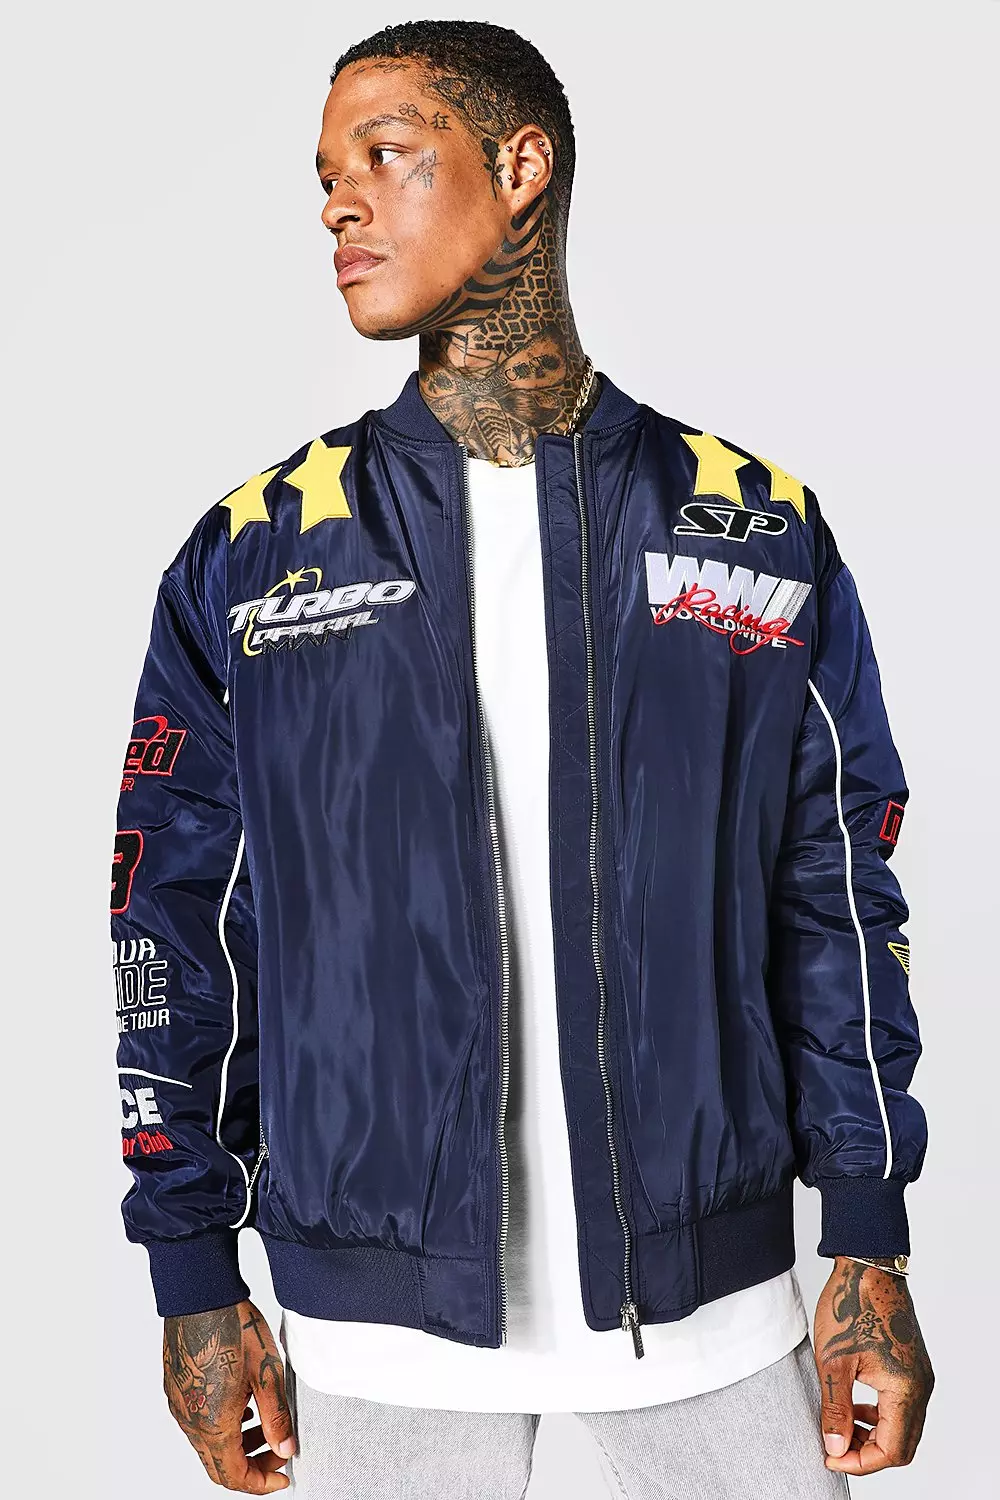 VETEMENTS Patched bomber jacket, Men's Clothing